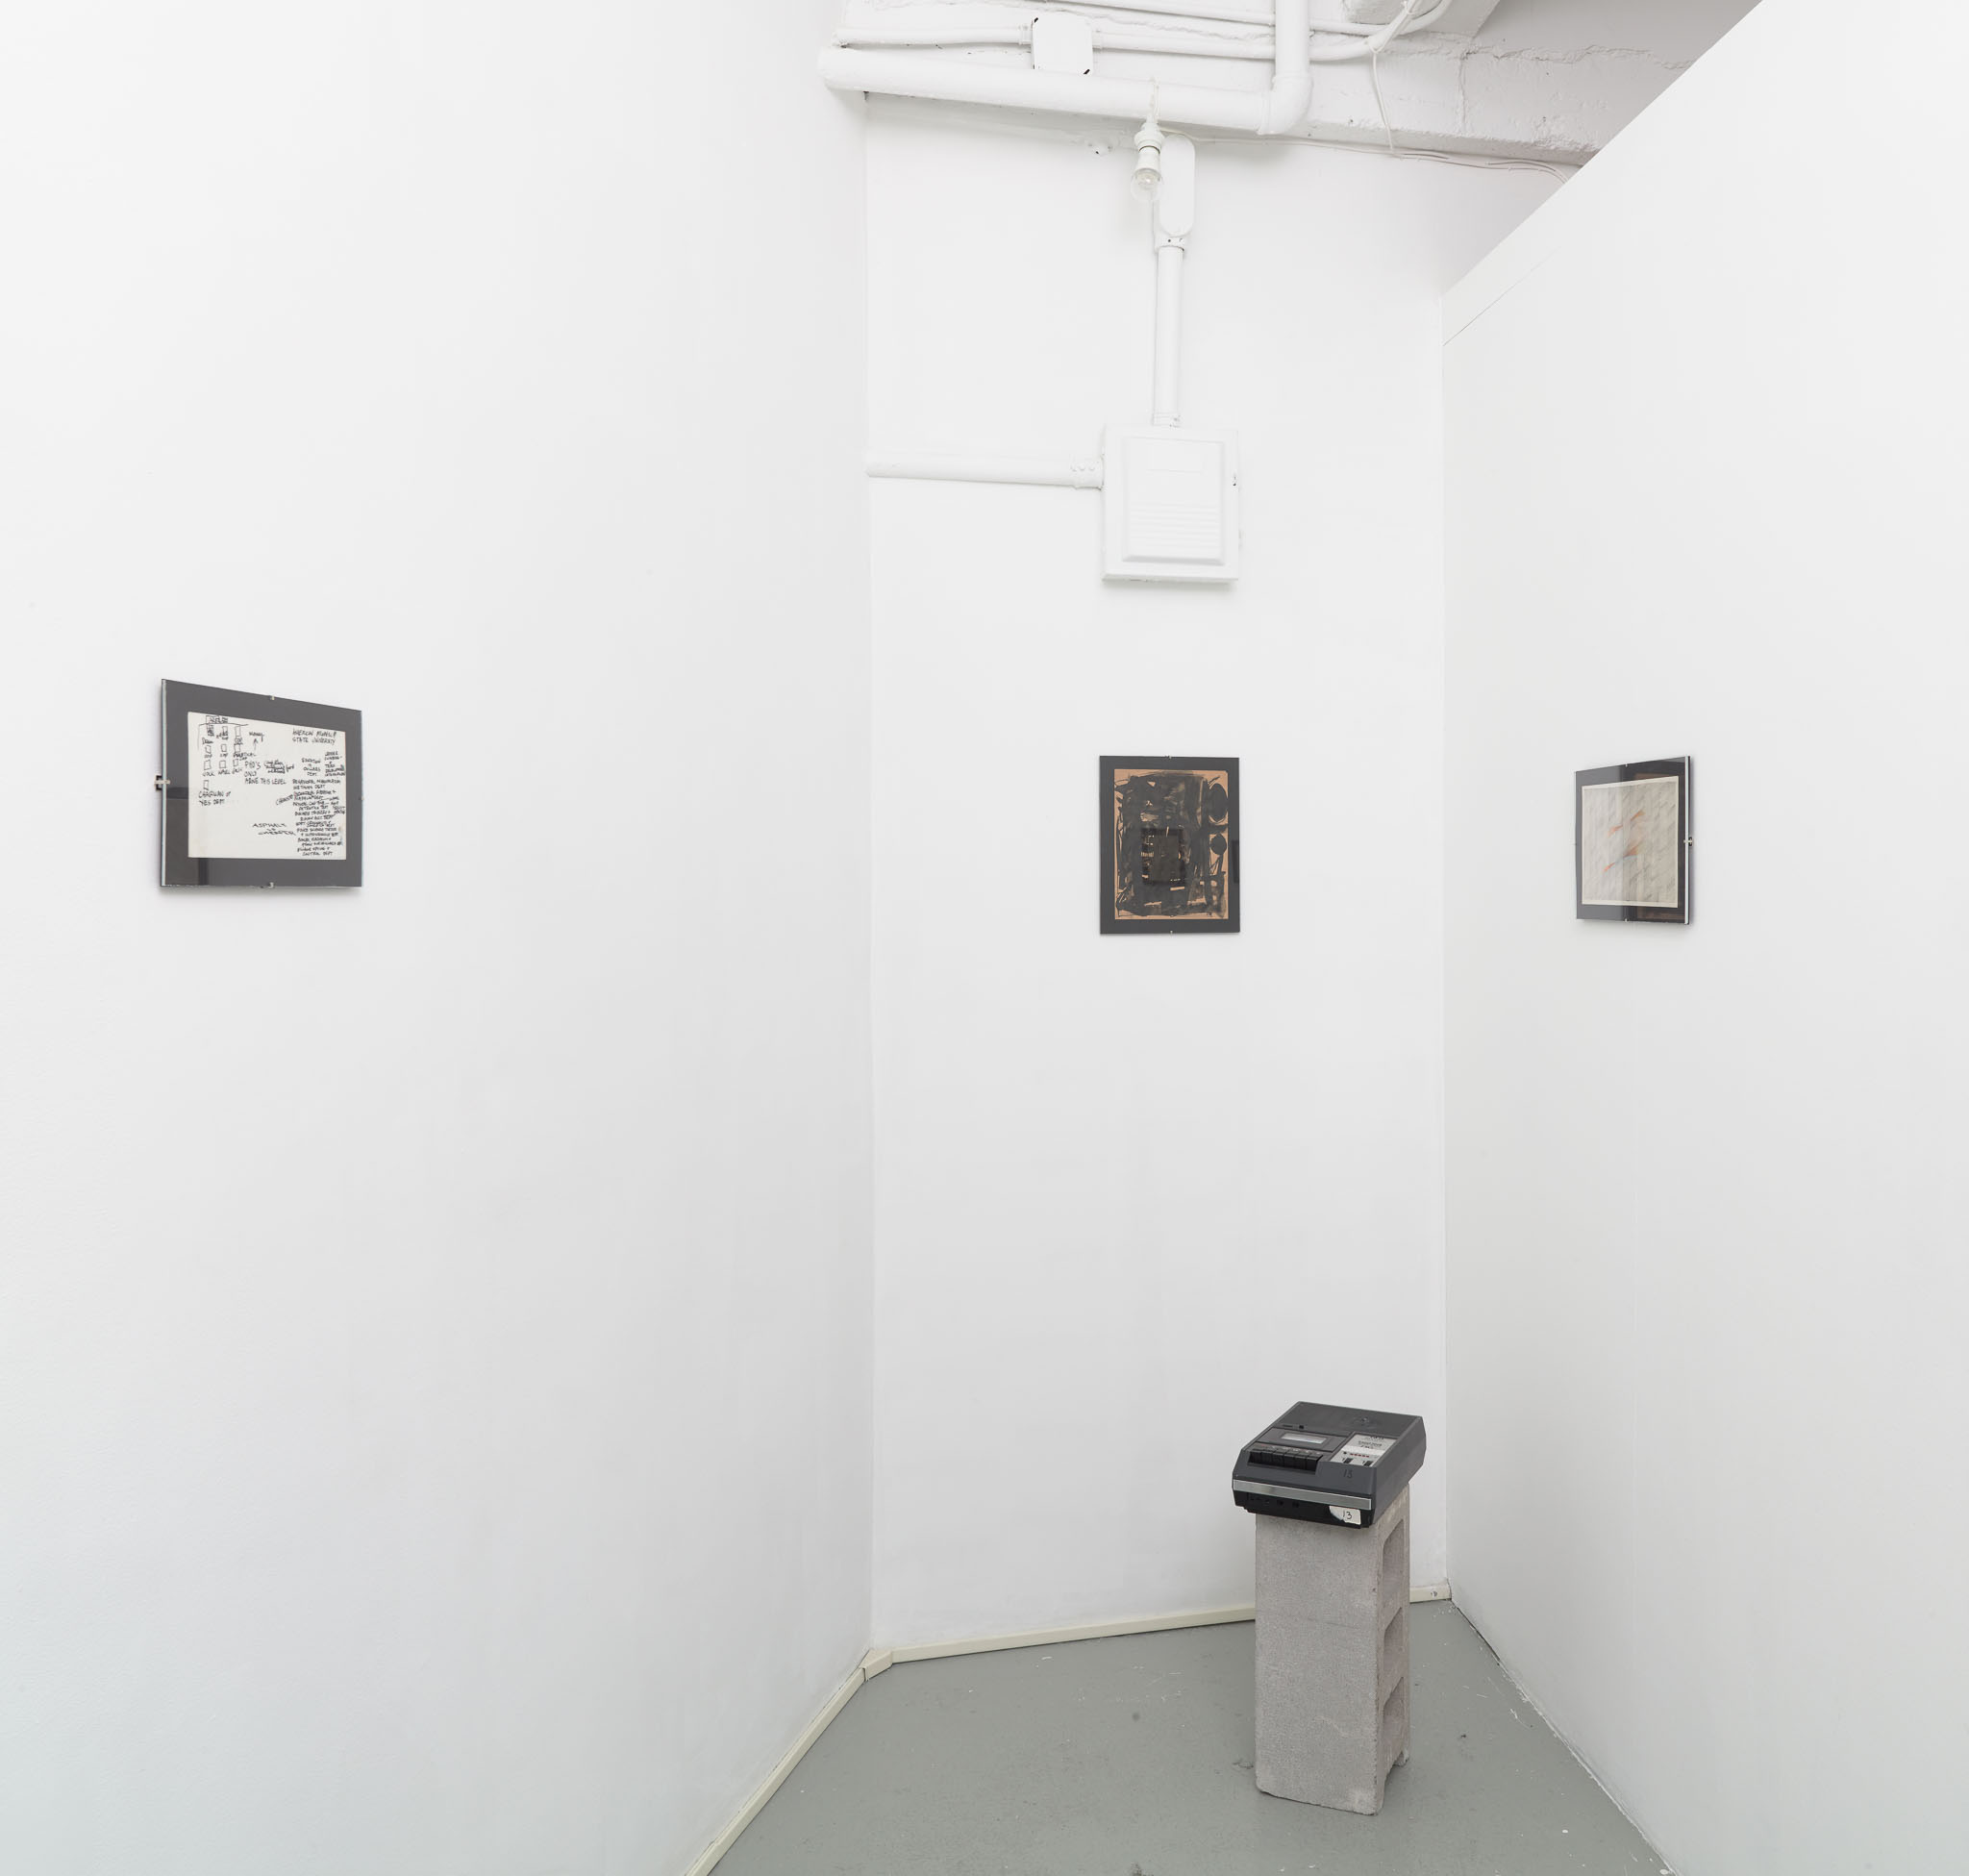 Installation view of Malcolm McClain: Visual Textual, showing framed works by McClain and casette players